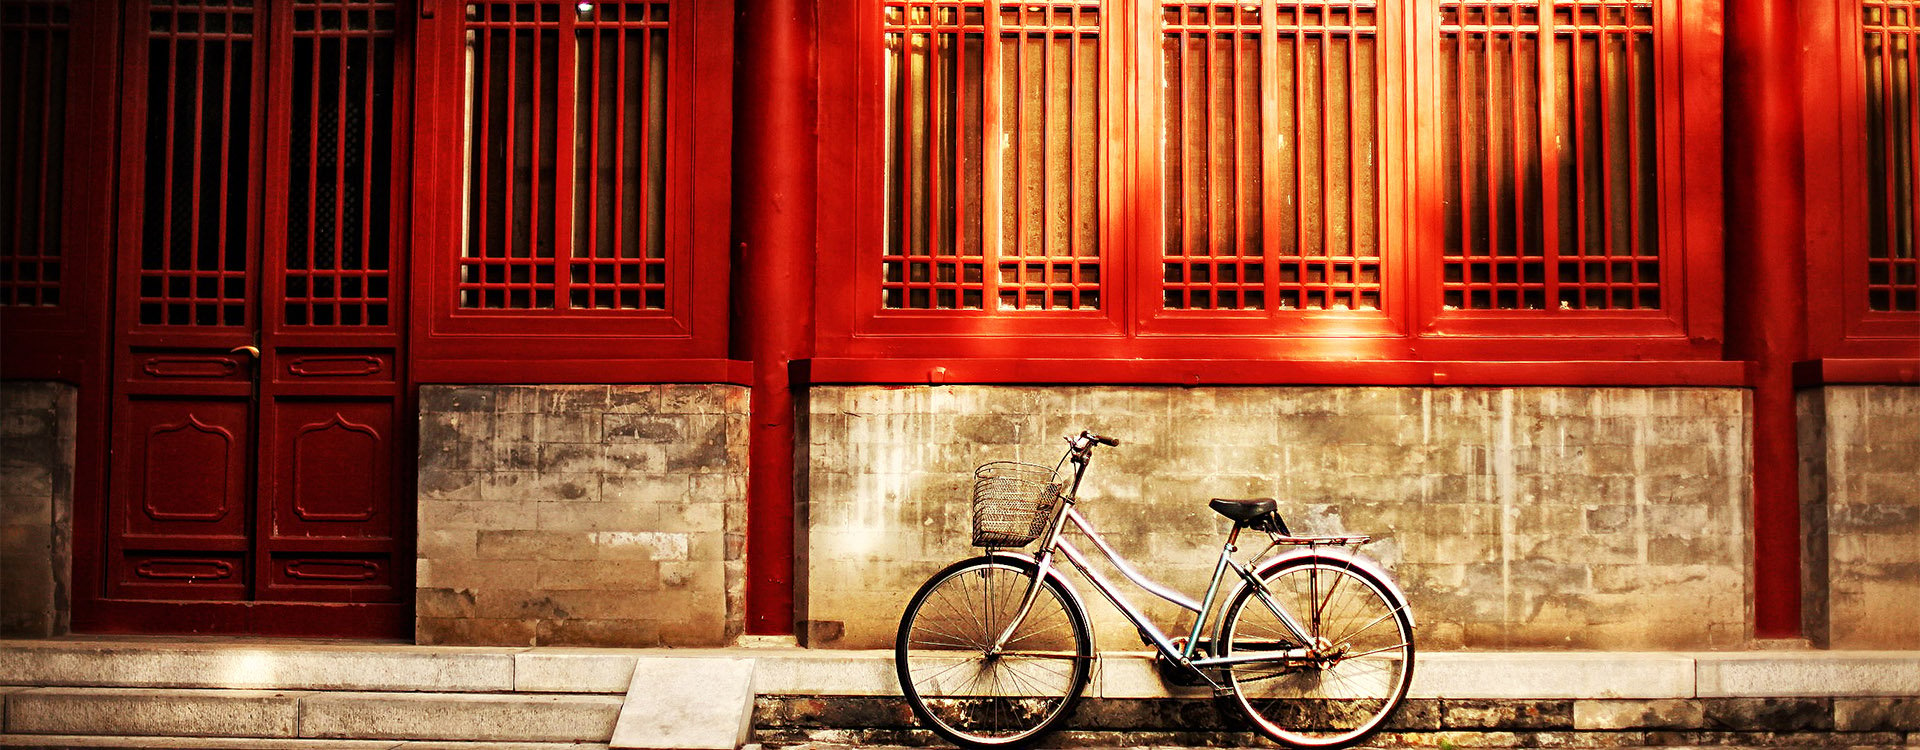 China oriental red building, urban Asia city